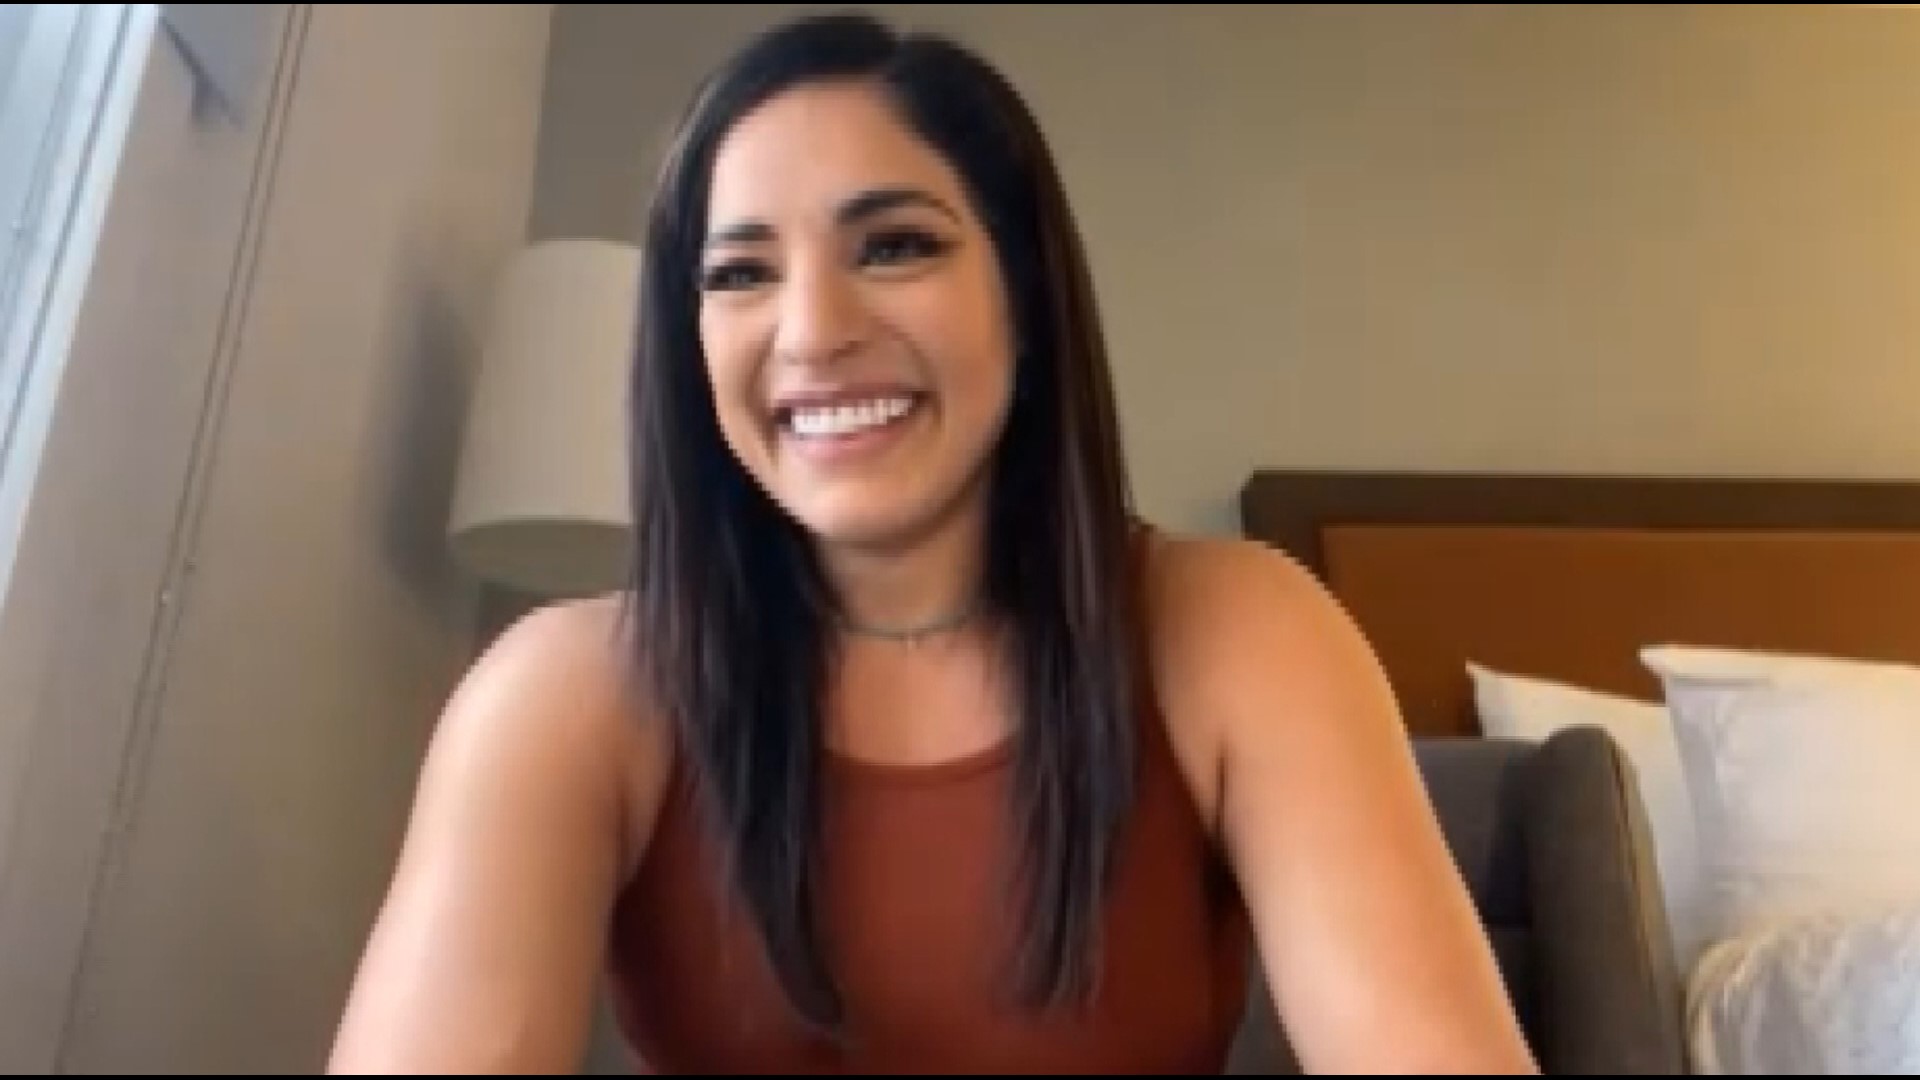 FOX61's Jonah Karp sat down with Rodriguez in an exclusive interview talking about her past and her experience in the WWE.